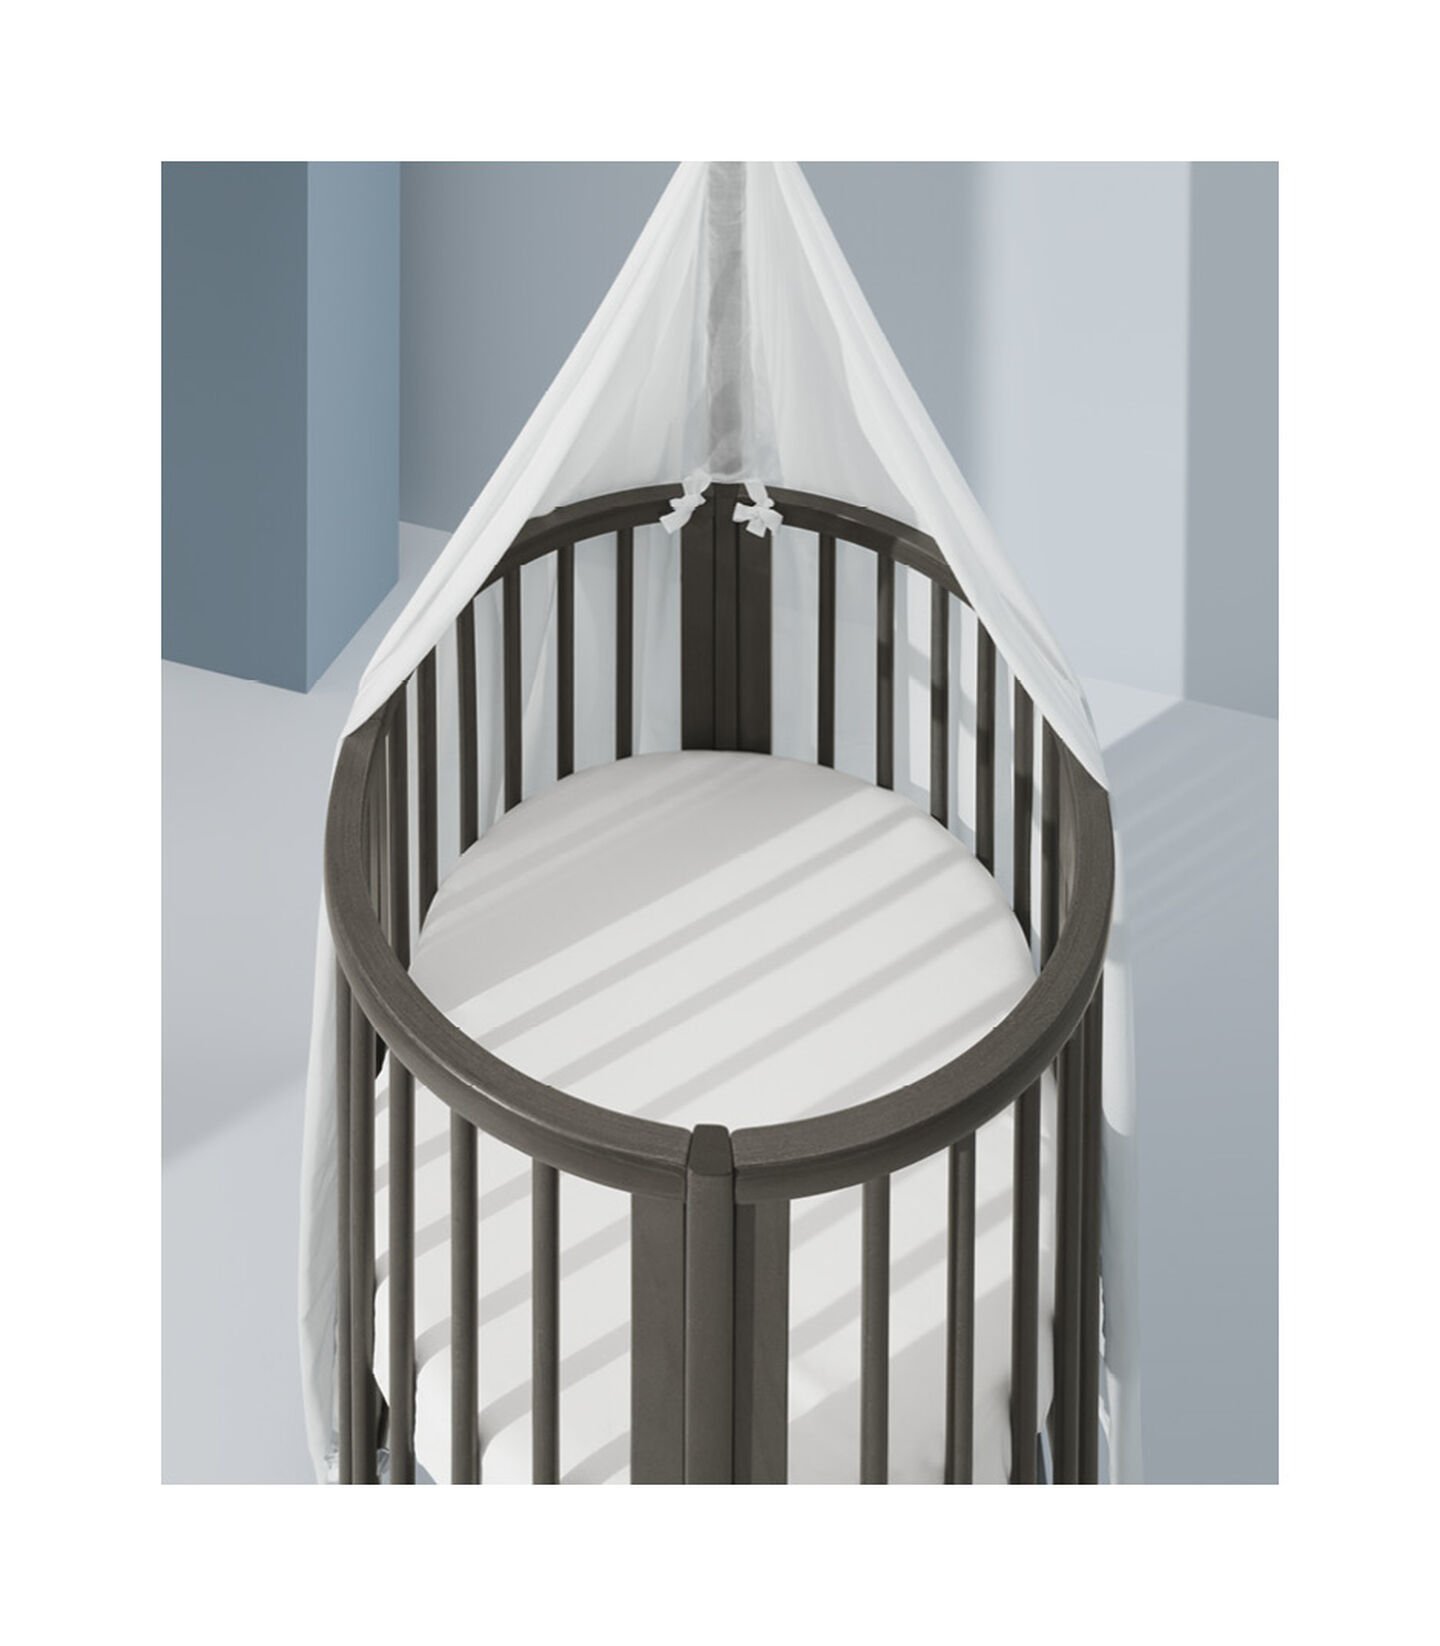 Stokke® Sleepi™ Mini 2022, Hazy Grey. With Mesh Liner. Top view, close-up.
 view 4